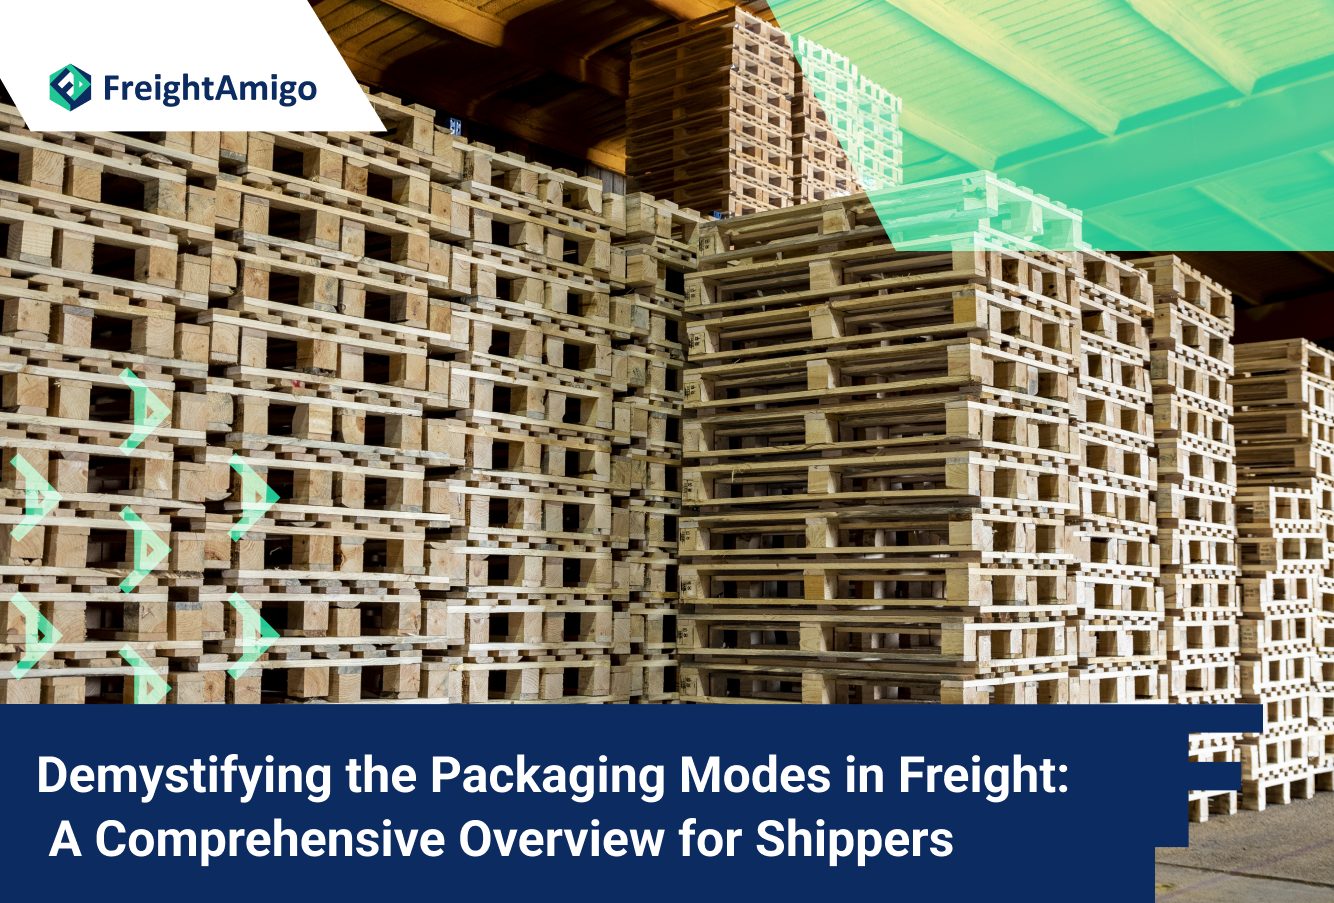 Demystifying the Packaging Modes in Freight: A Comprehensive Overview for Shippers